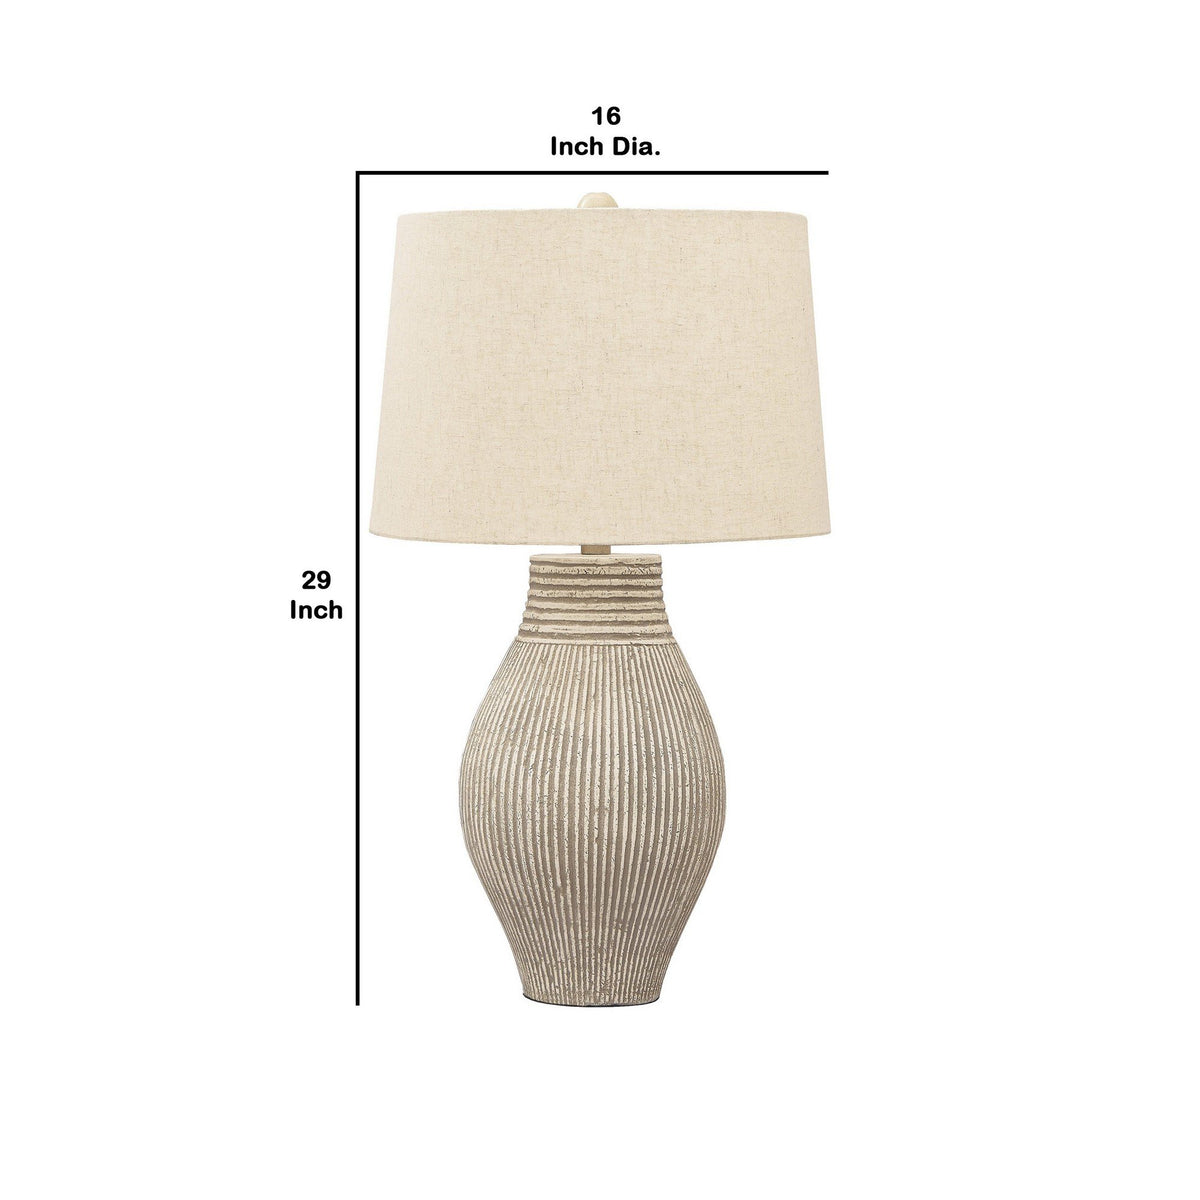 Drum Shade Table Lamp with Paper Composite Base, Beige - BM230940